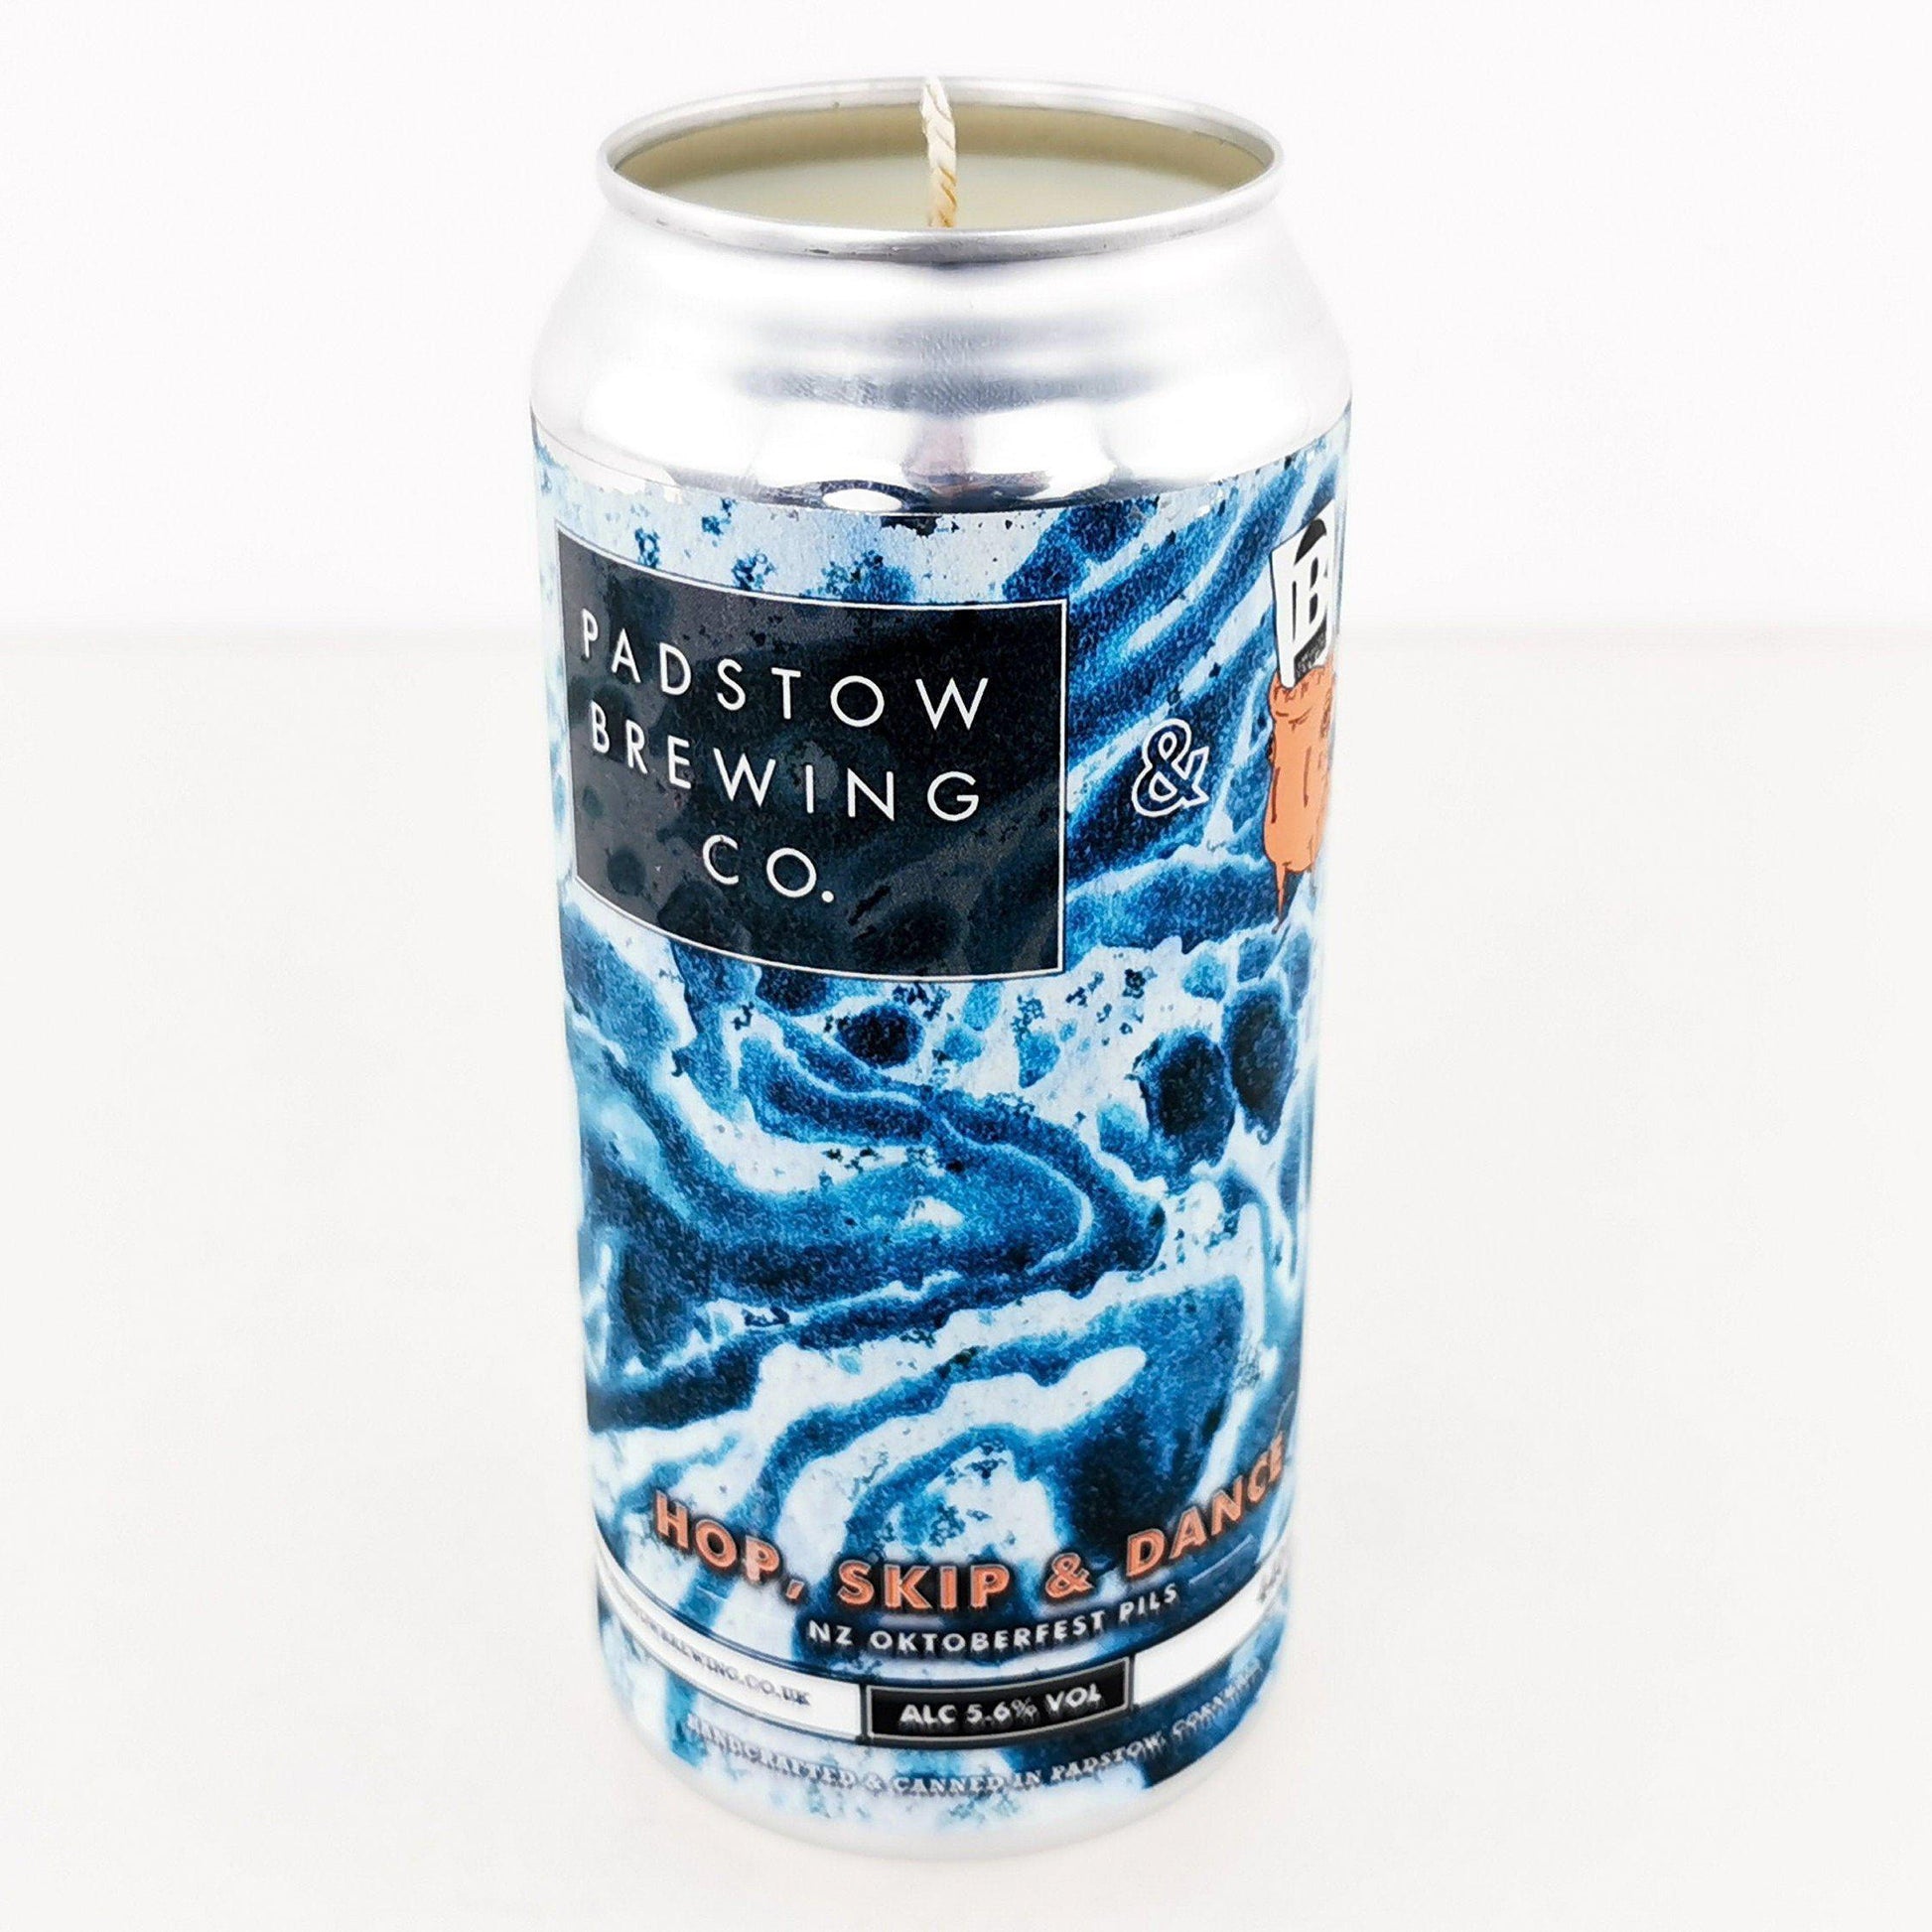 Padstow Brewing Hop Skip Dance Craft Beer Can Candle-Beer Can Candles-Adhock Homeware